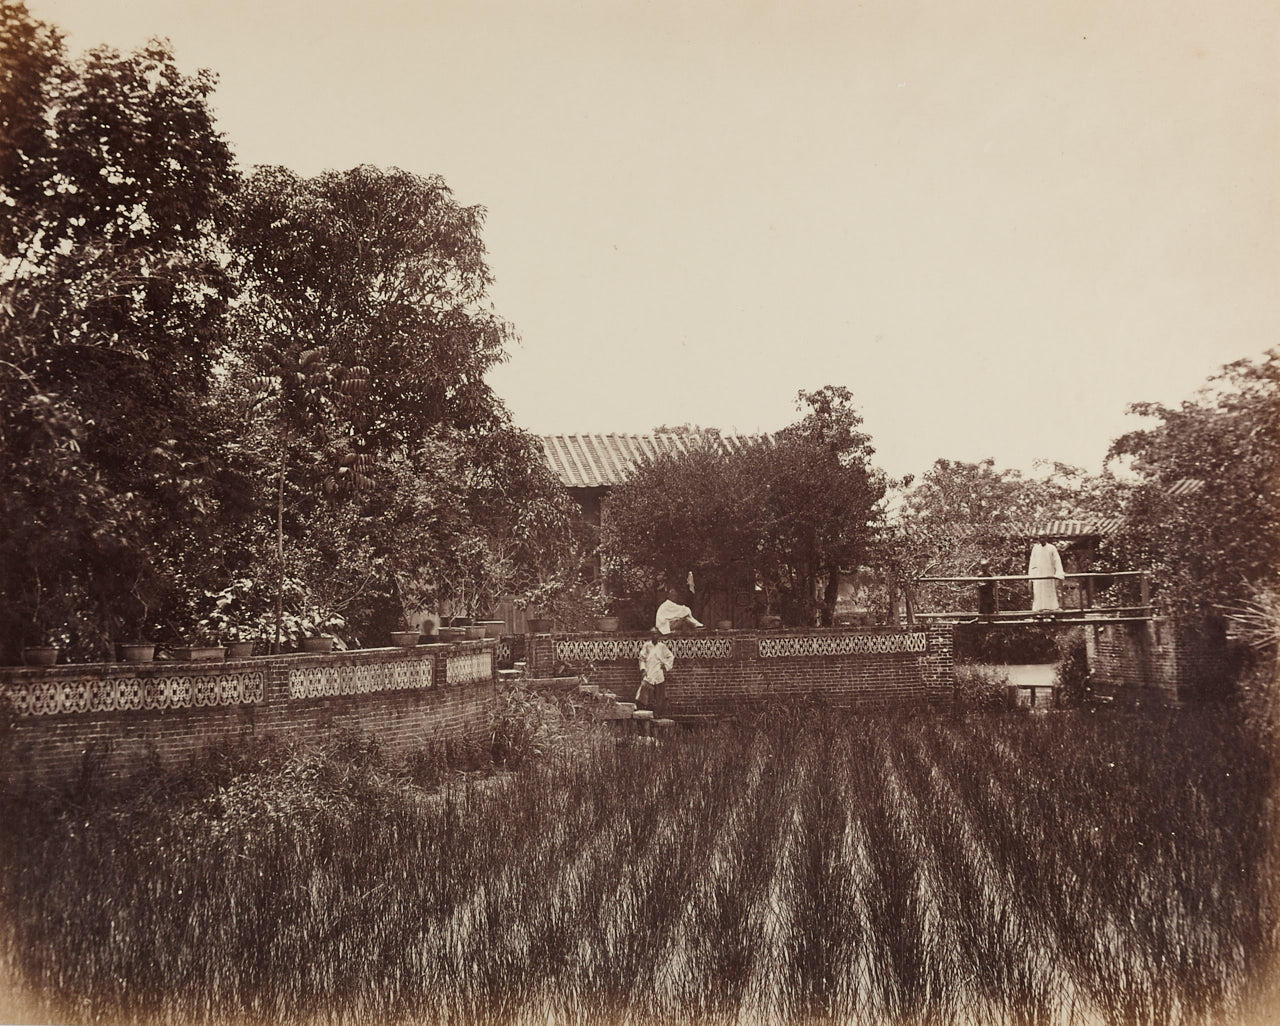 ANONYMOUS PHOTOGRAPHER Overlooking Rice Field, China 1870s